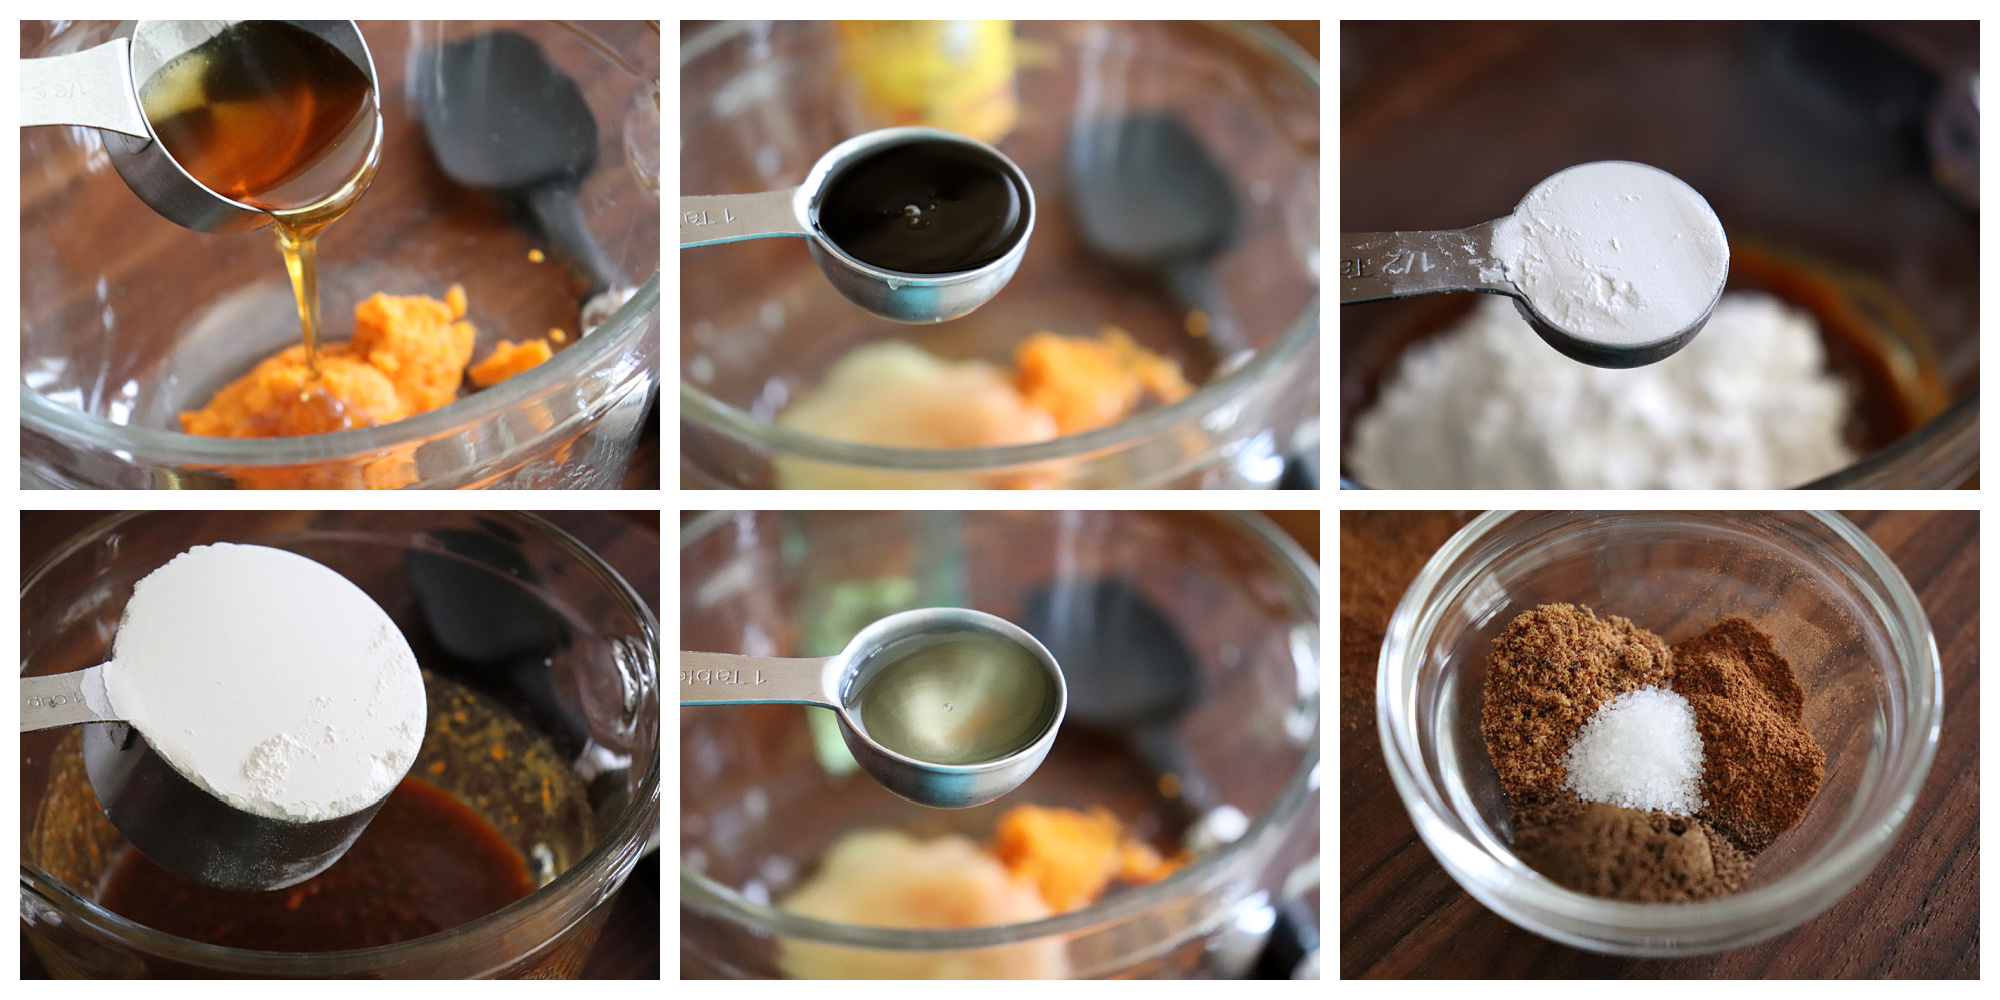 Collage of ingredients for Sweet Potato Bread Recipe